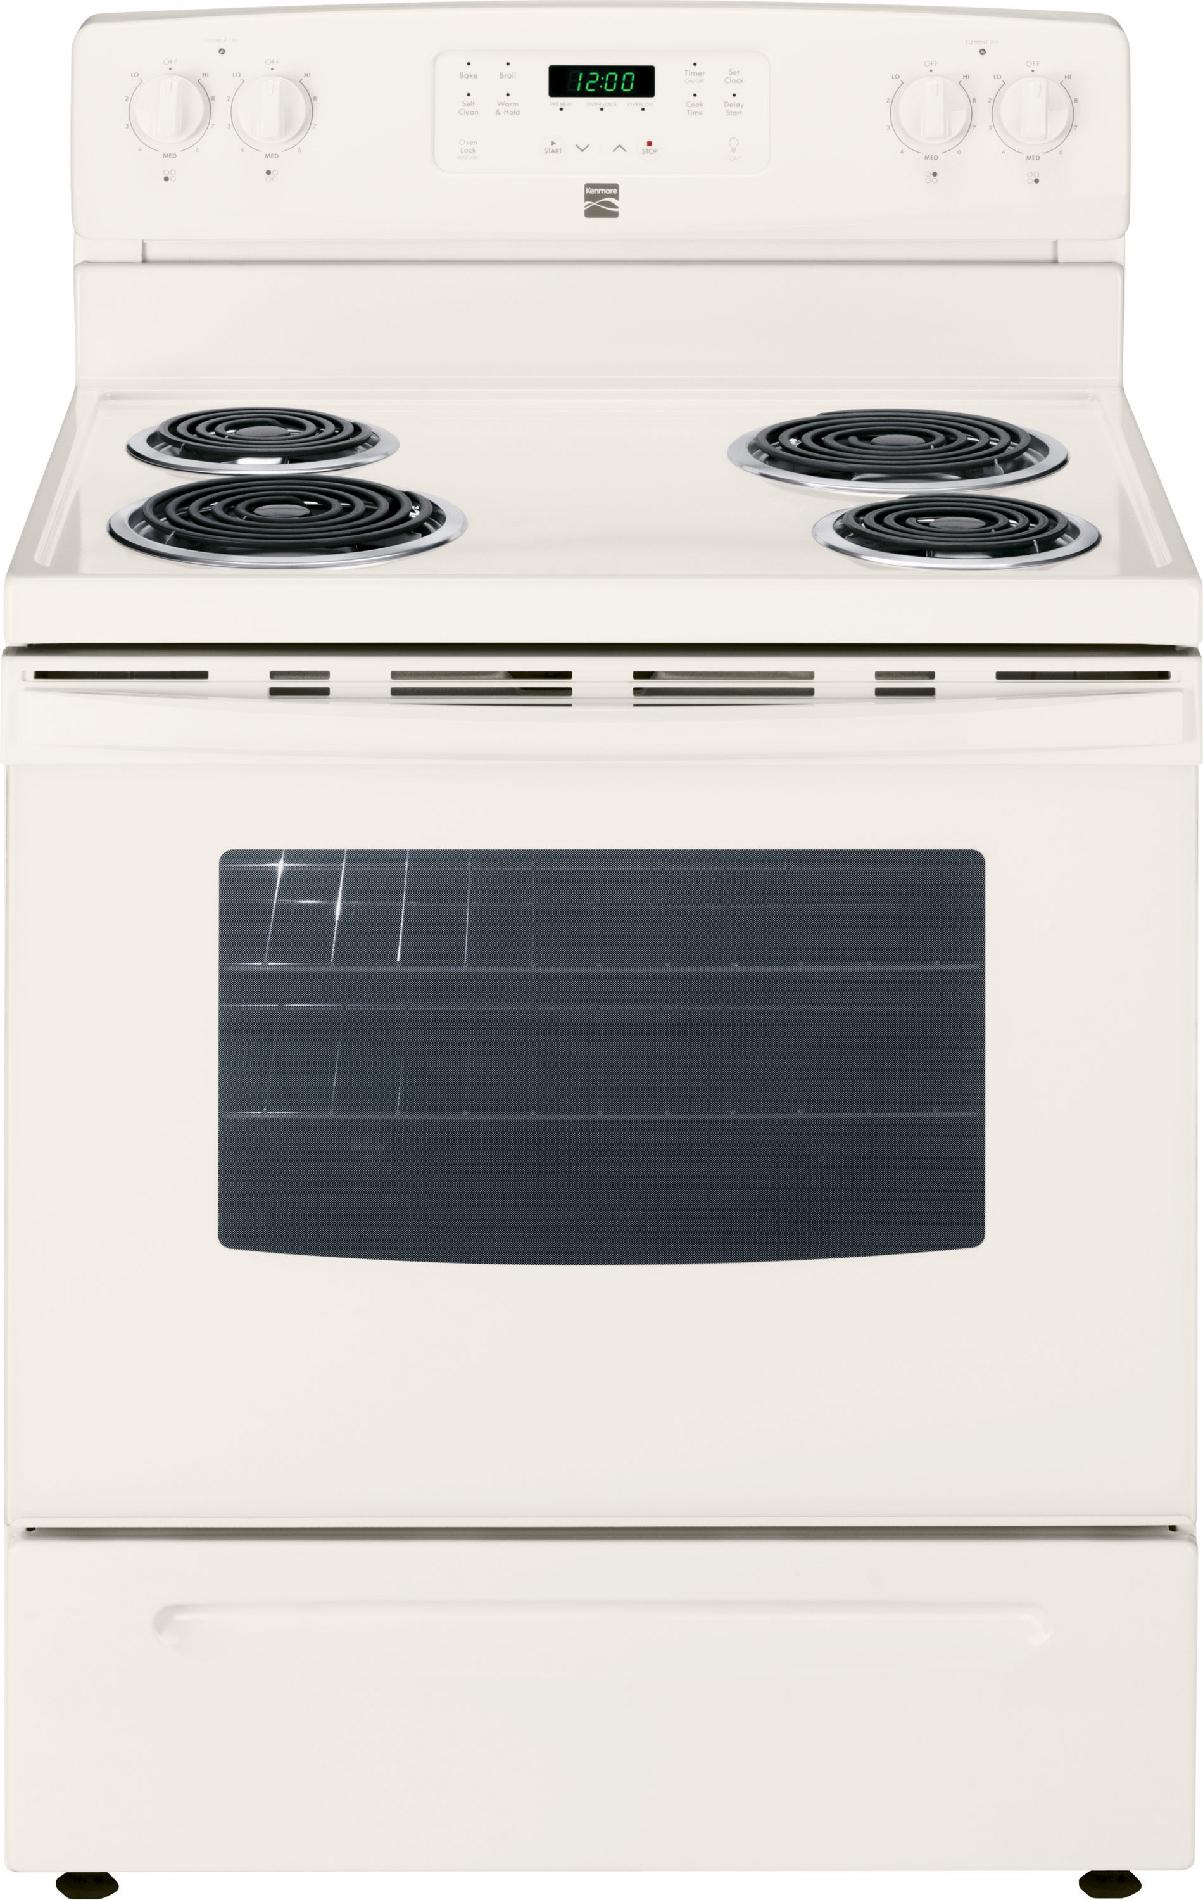 0012505508066 - 94144 5.3 CU. FT. ELECTRIC RANGE W/ SELF-CLEANING OVEN - BISQUE